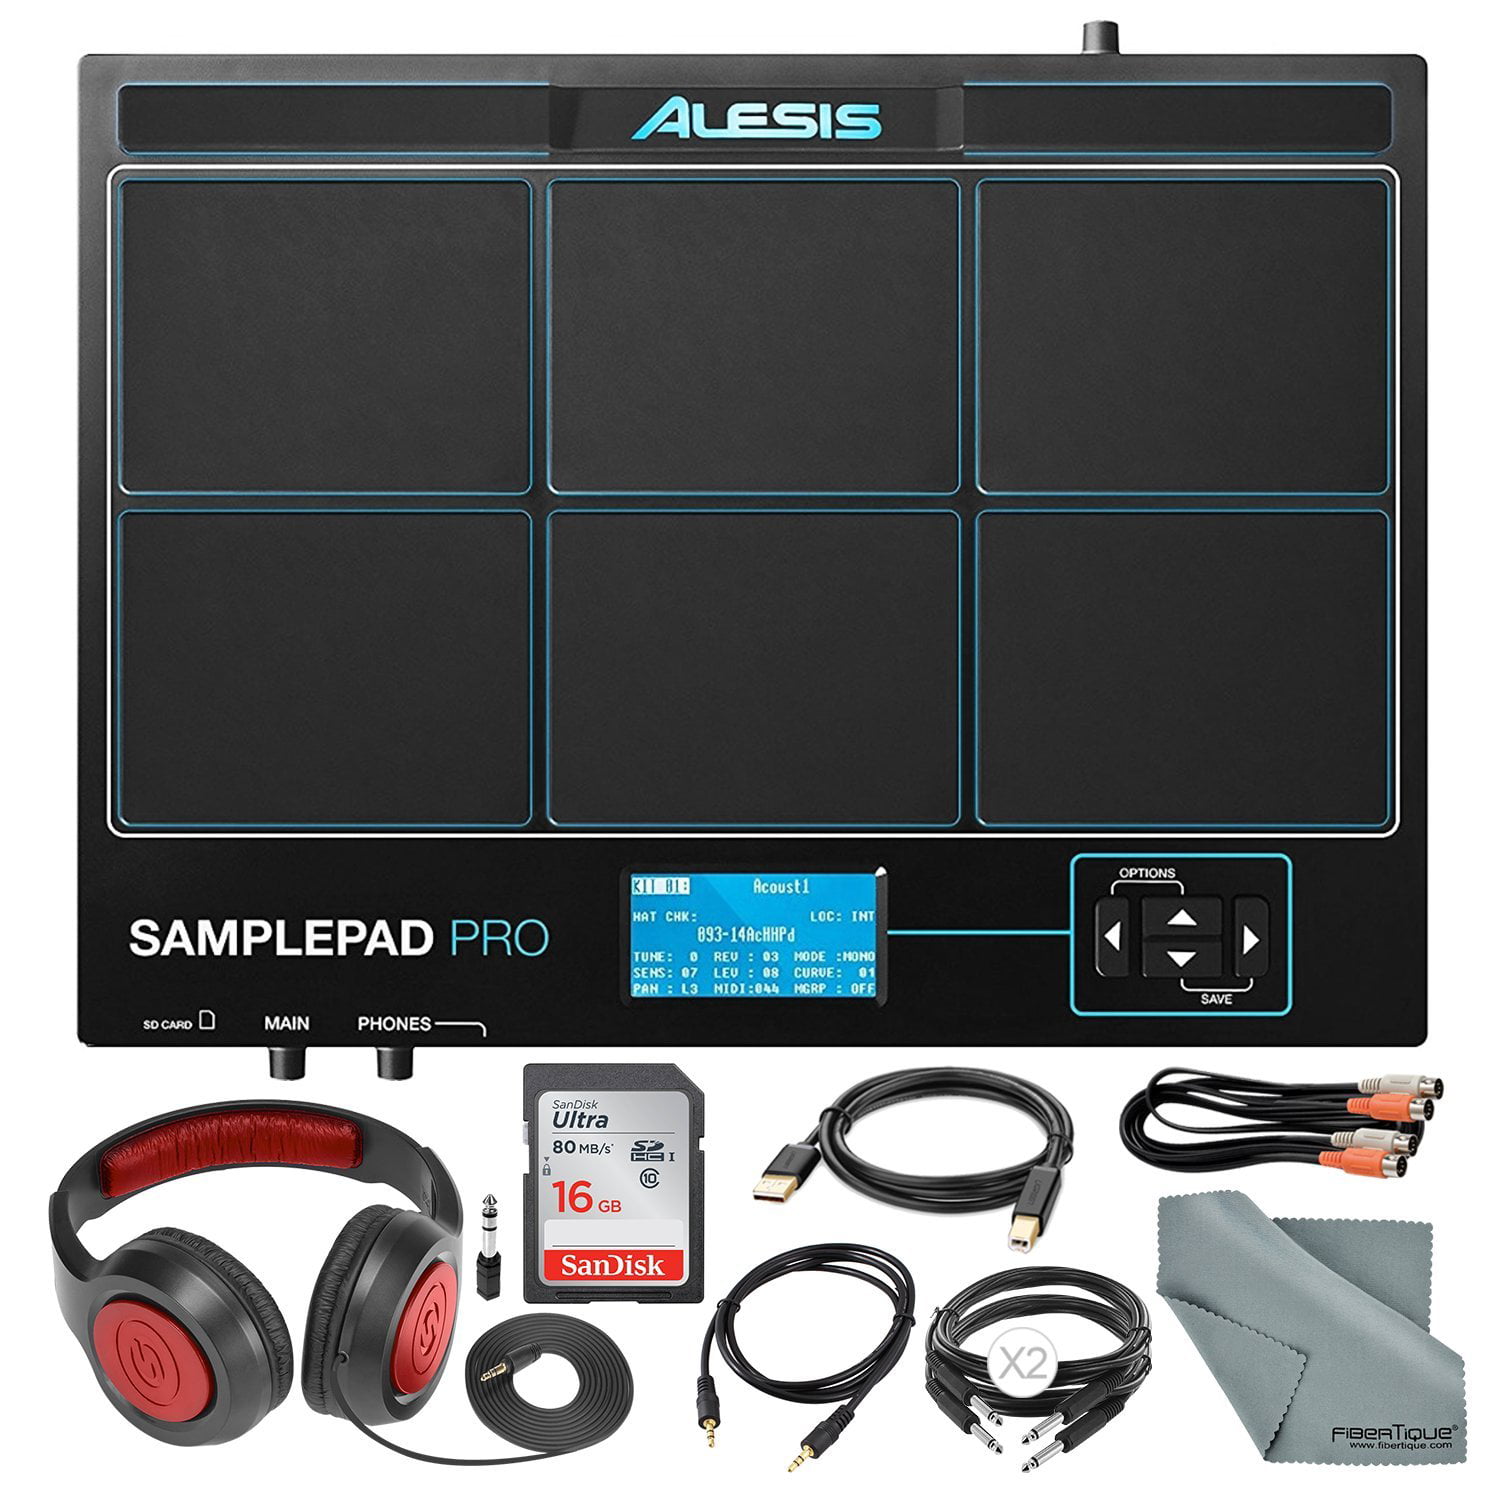 Alesis SamplePad Pro 8-Pad Percussion and Triggering Instrument with Samson  Headphones, 16GB Card, and Assorted Cables Accessory Bundle